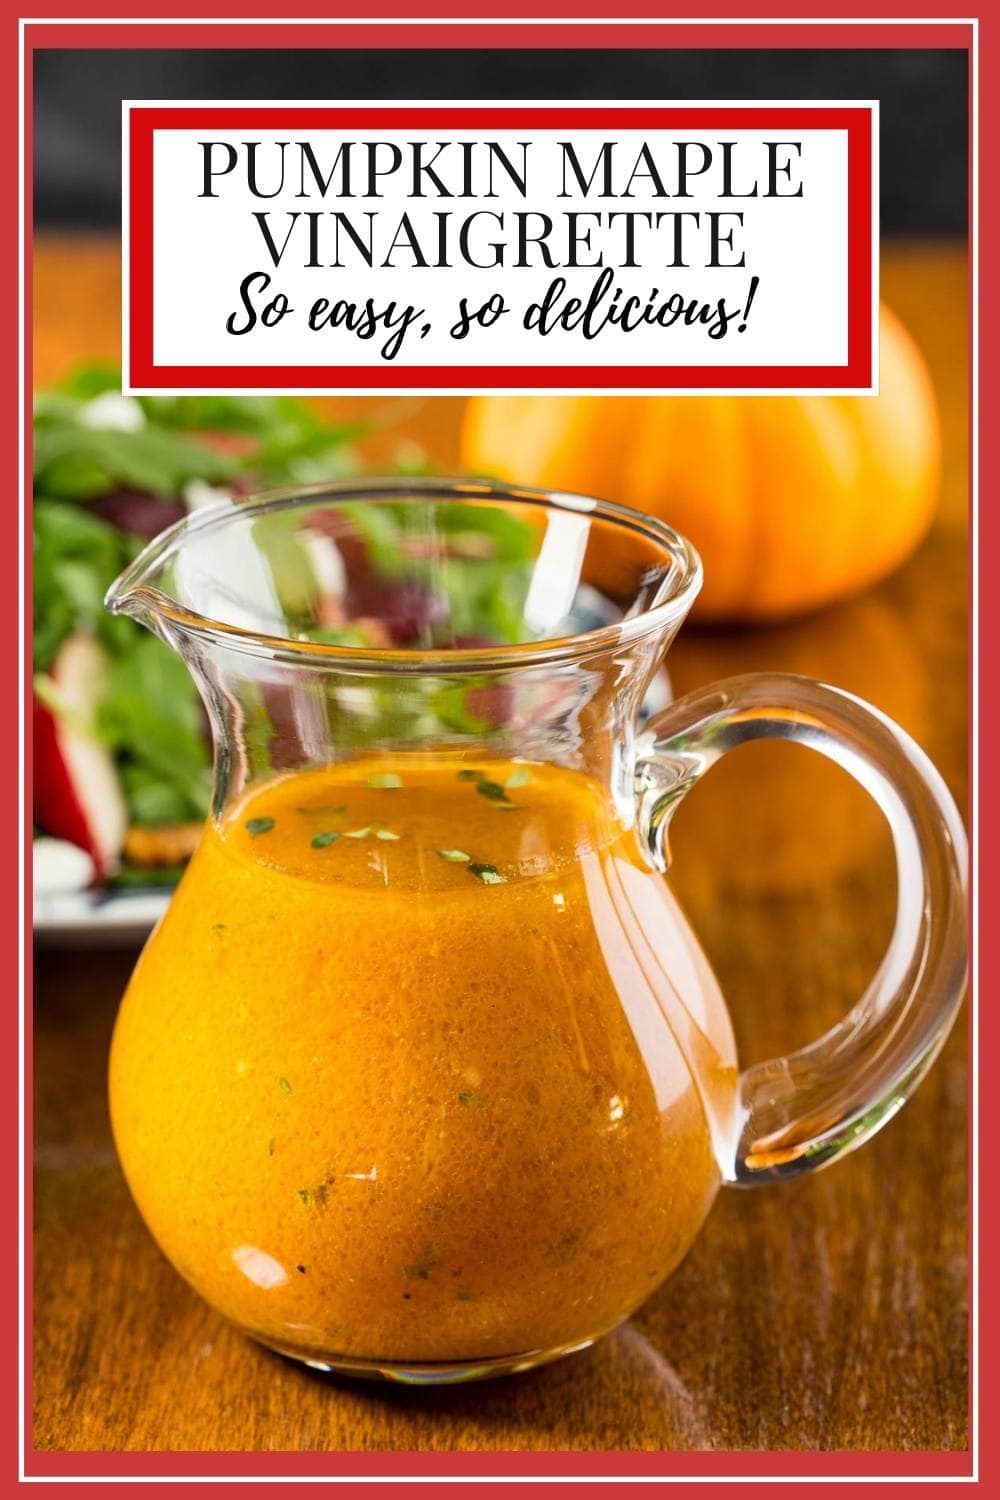 Pumpkin Maple Vinaigrette - Add a Touch of Fall Pizzazz to Your Meals!